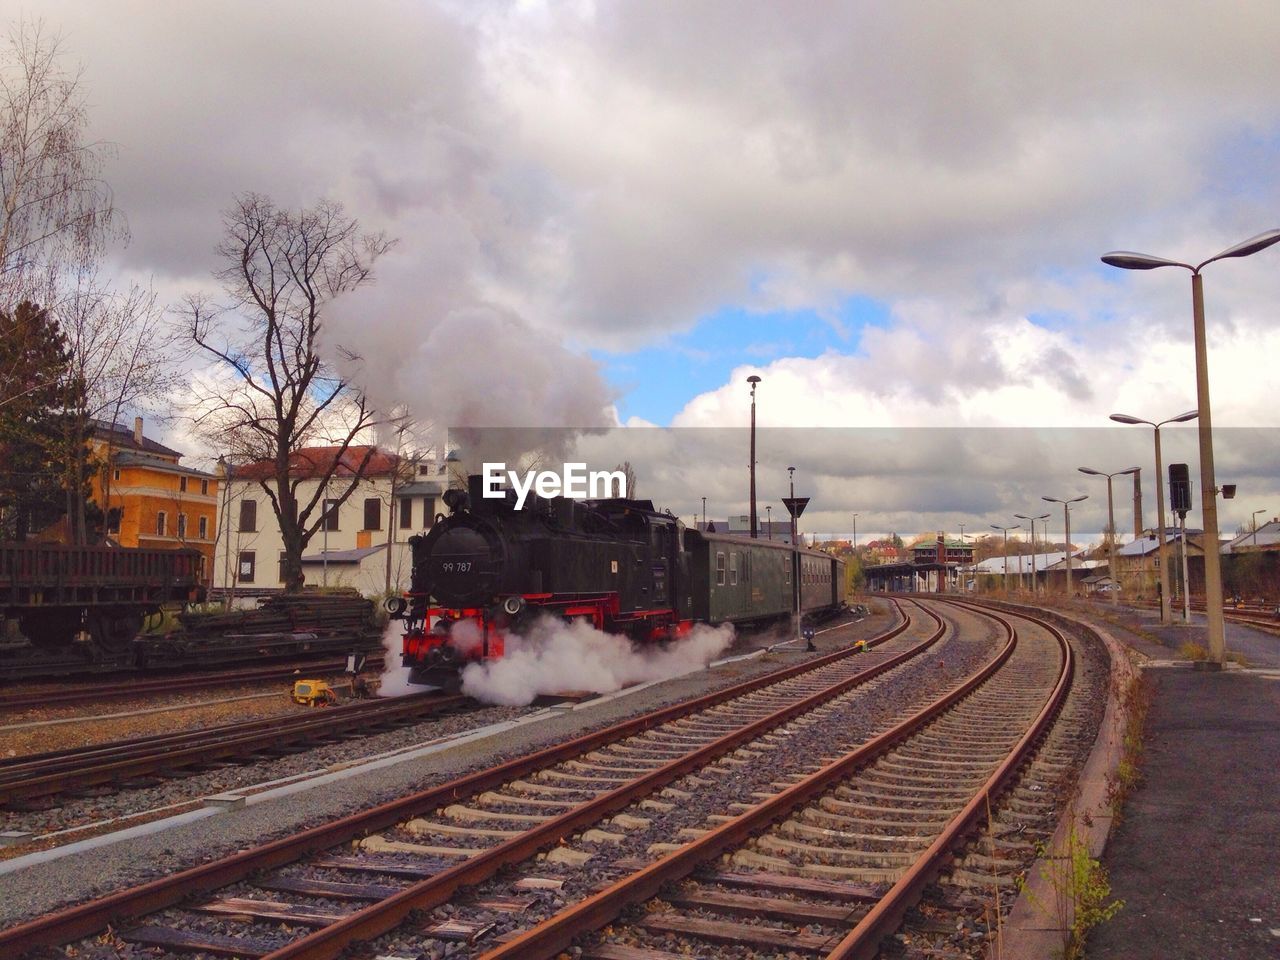 View of steam train on track